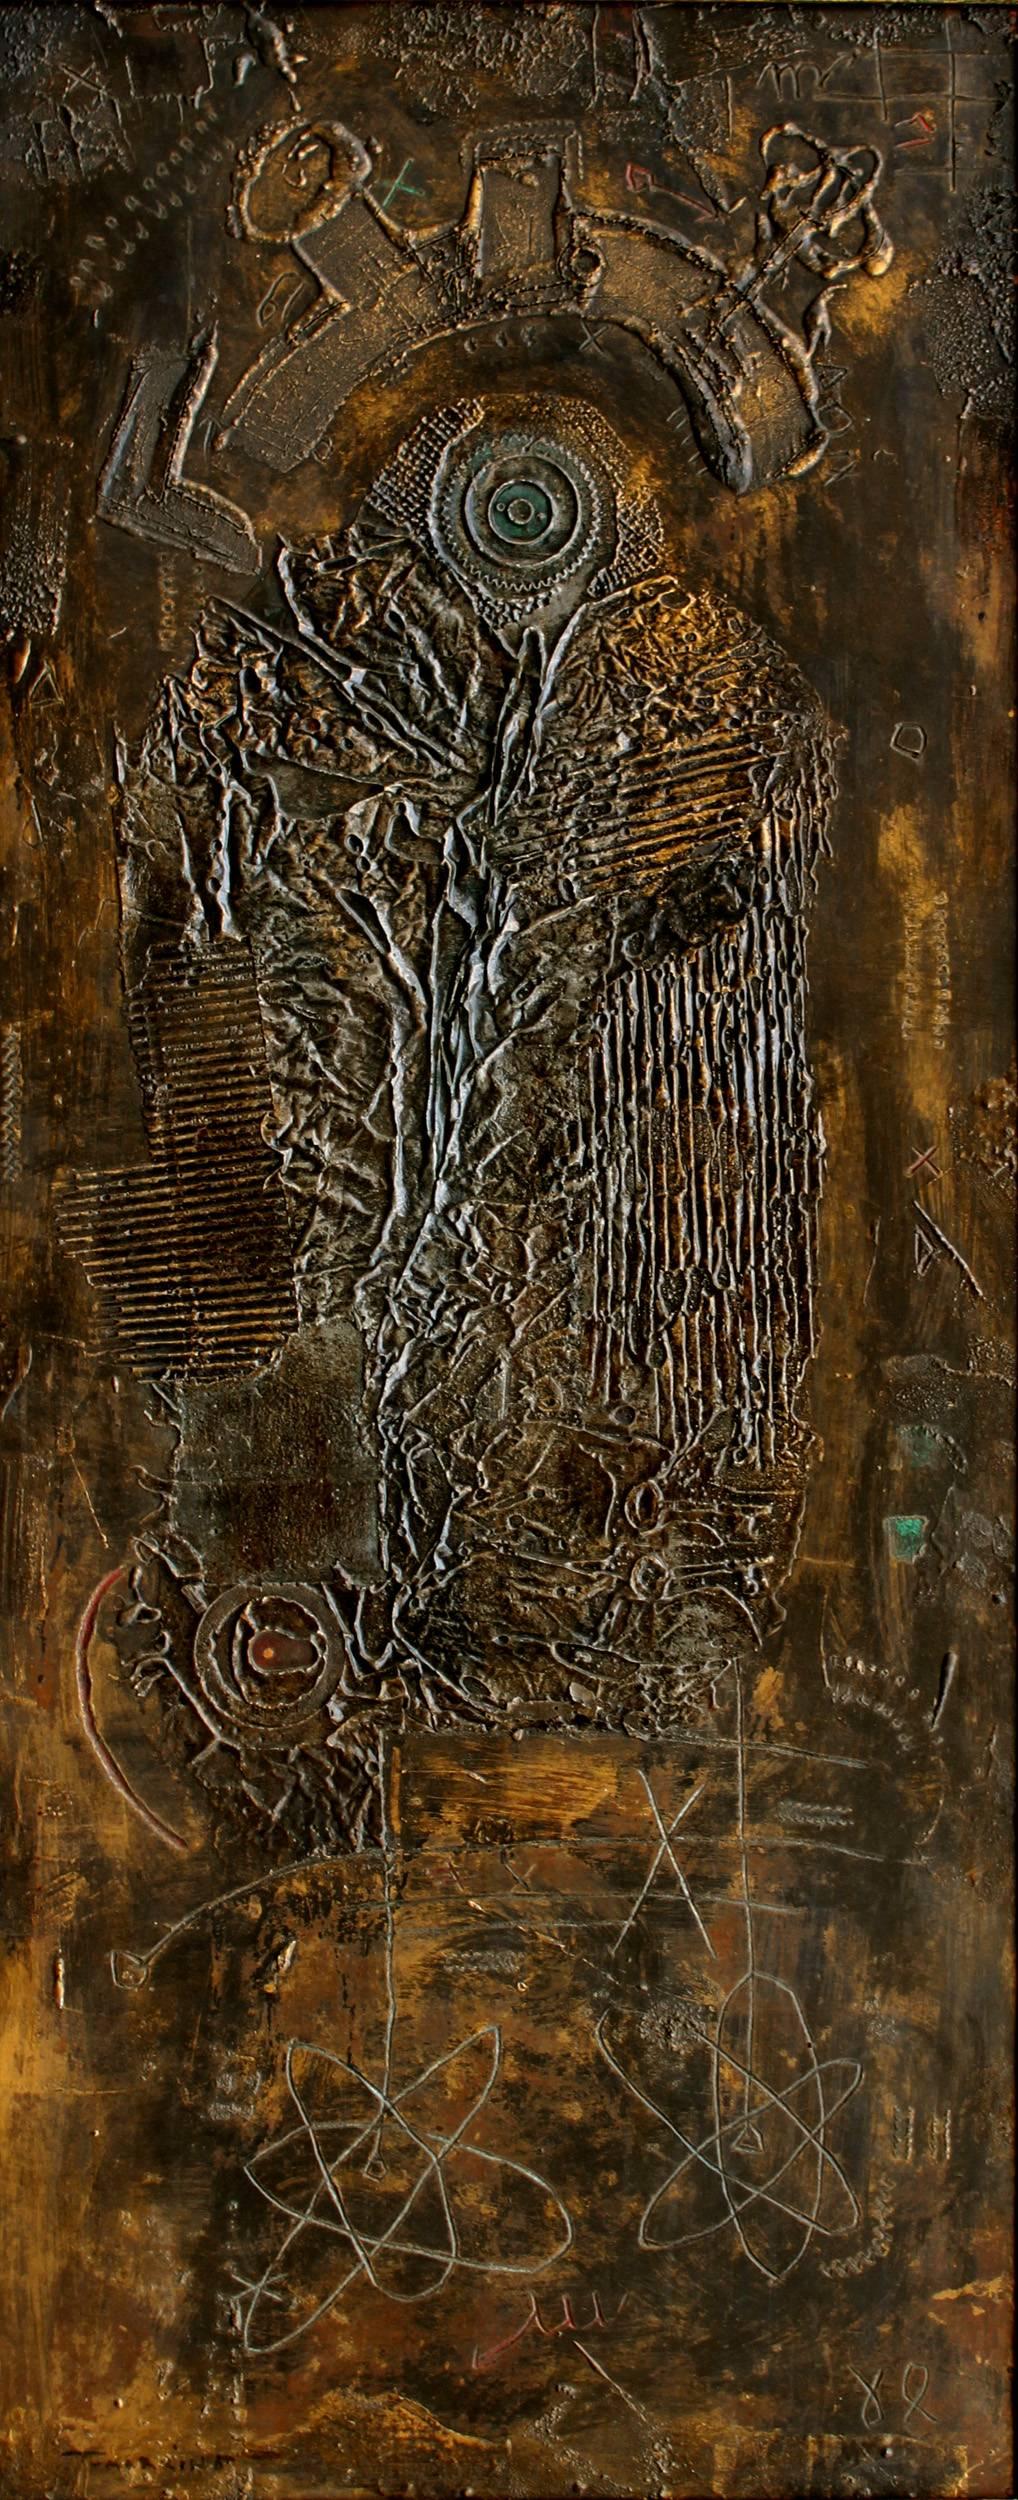 Composition by IGAEL TUMARKIN - Mixed media, large artwork, abstract art - Mixed Media Art by Igael Tumarkin